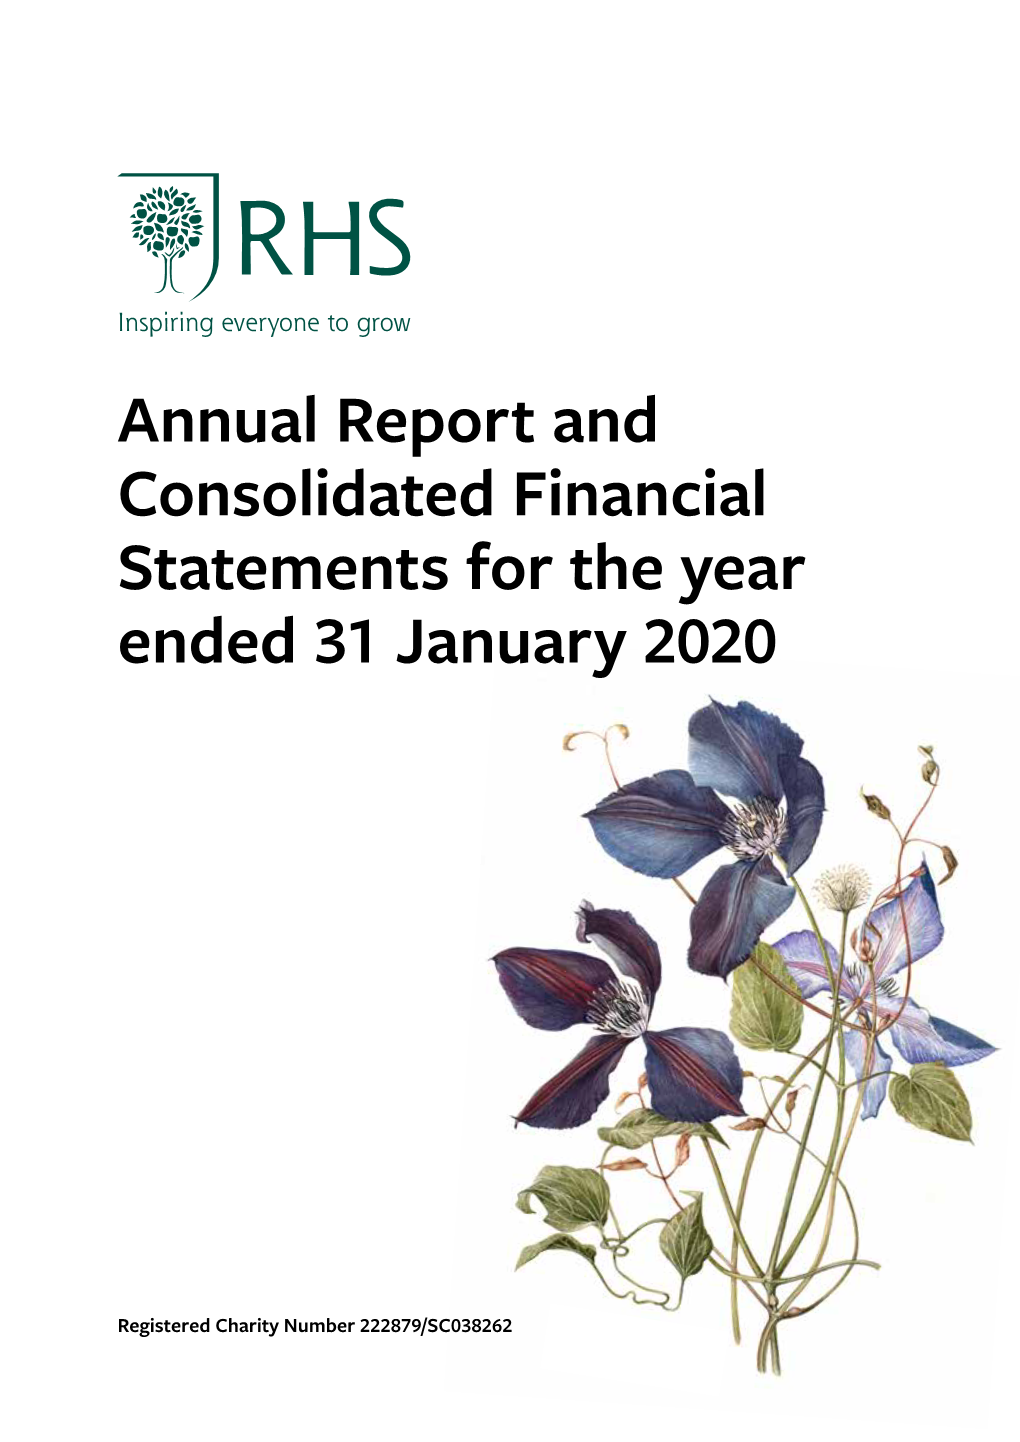 RHS Annual Report and Consolidated Financial Statements for 2019–20